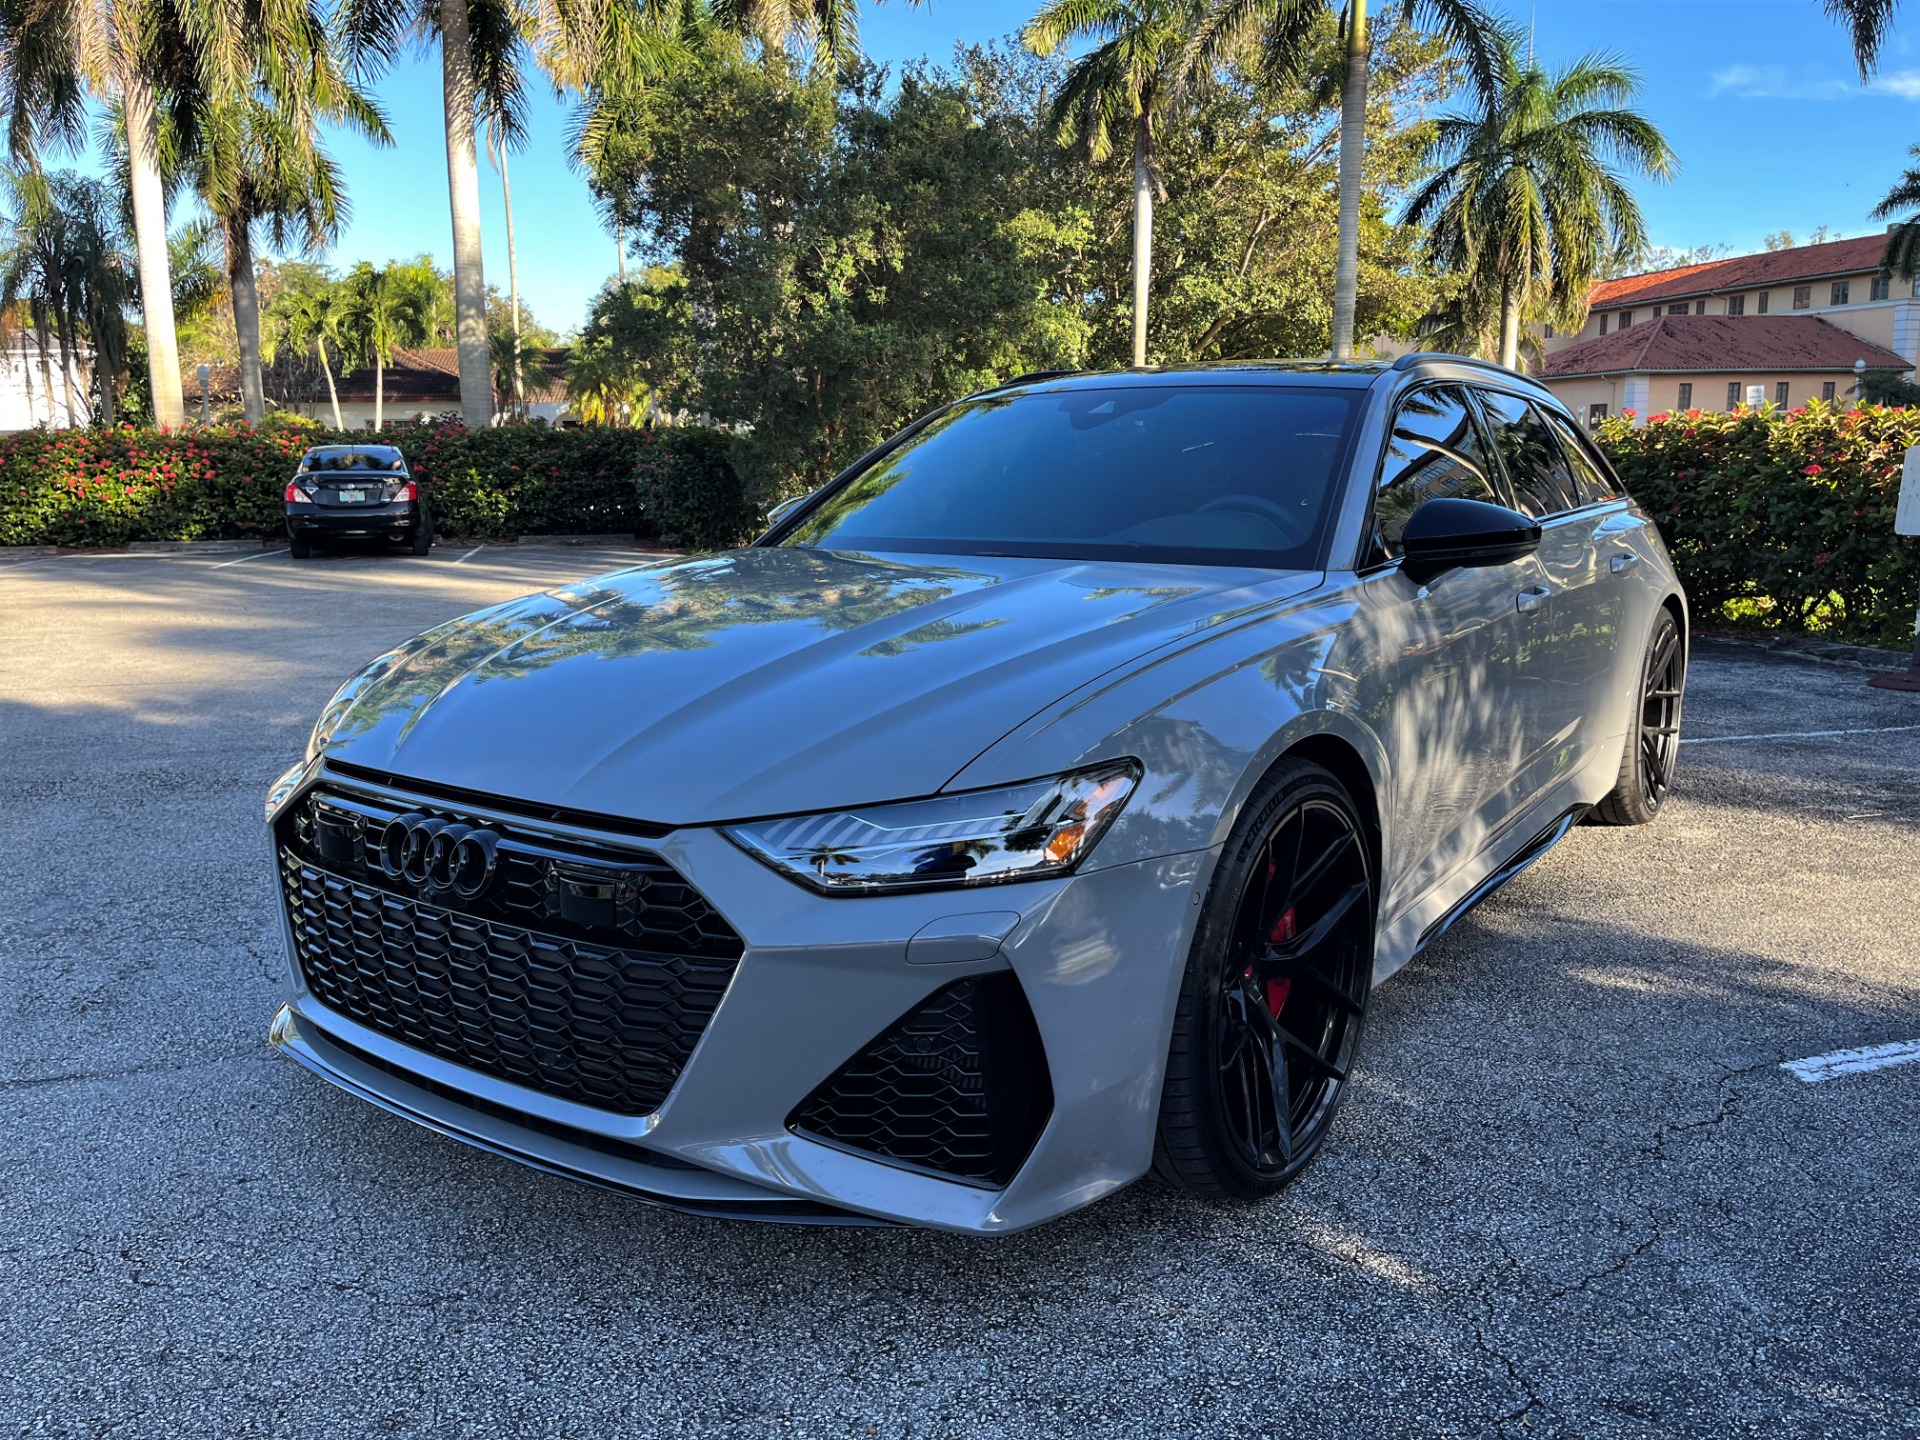 Used 2021 Audi RS 6 Avant 4.0T quattro Avant for sale $119,850 at The Gables Sports Cars in Miami FL 33146 4